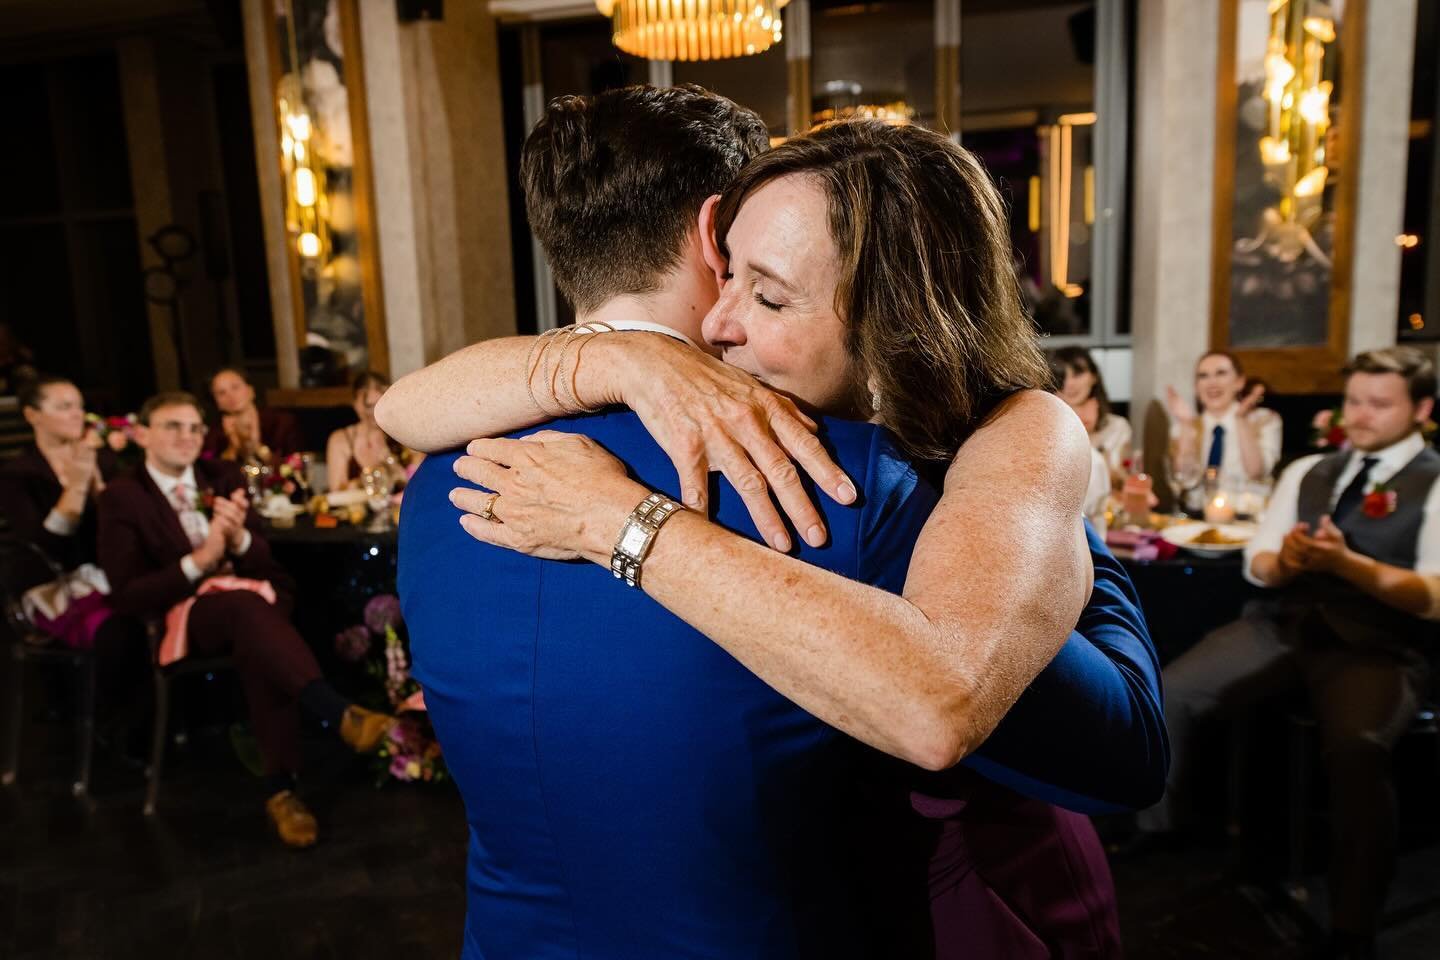 Happy Mother&rsquo;s Day to the wonderful mothers, and motherly figures in our lives 💕

And of course, happy first Mother&rsquo;s Day to owner Laura Reitsma! 

#fierce #fiercepros #weddingplanning #chicagoweddingplanner #events #uniqueevents #dareto